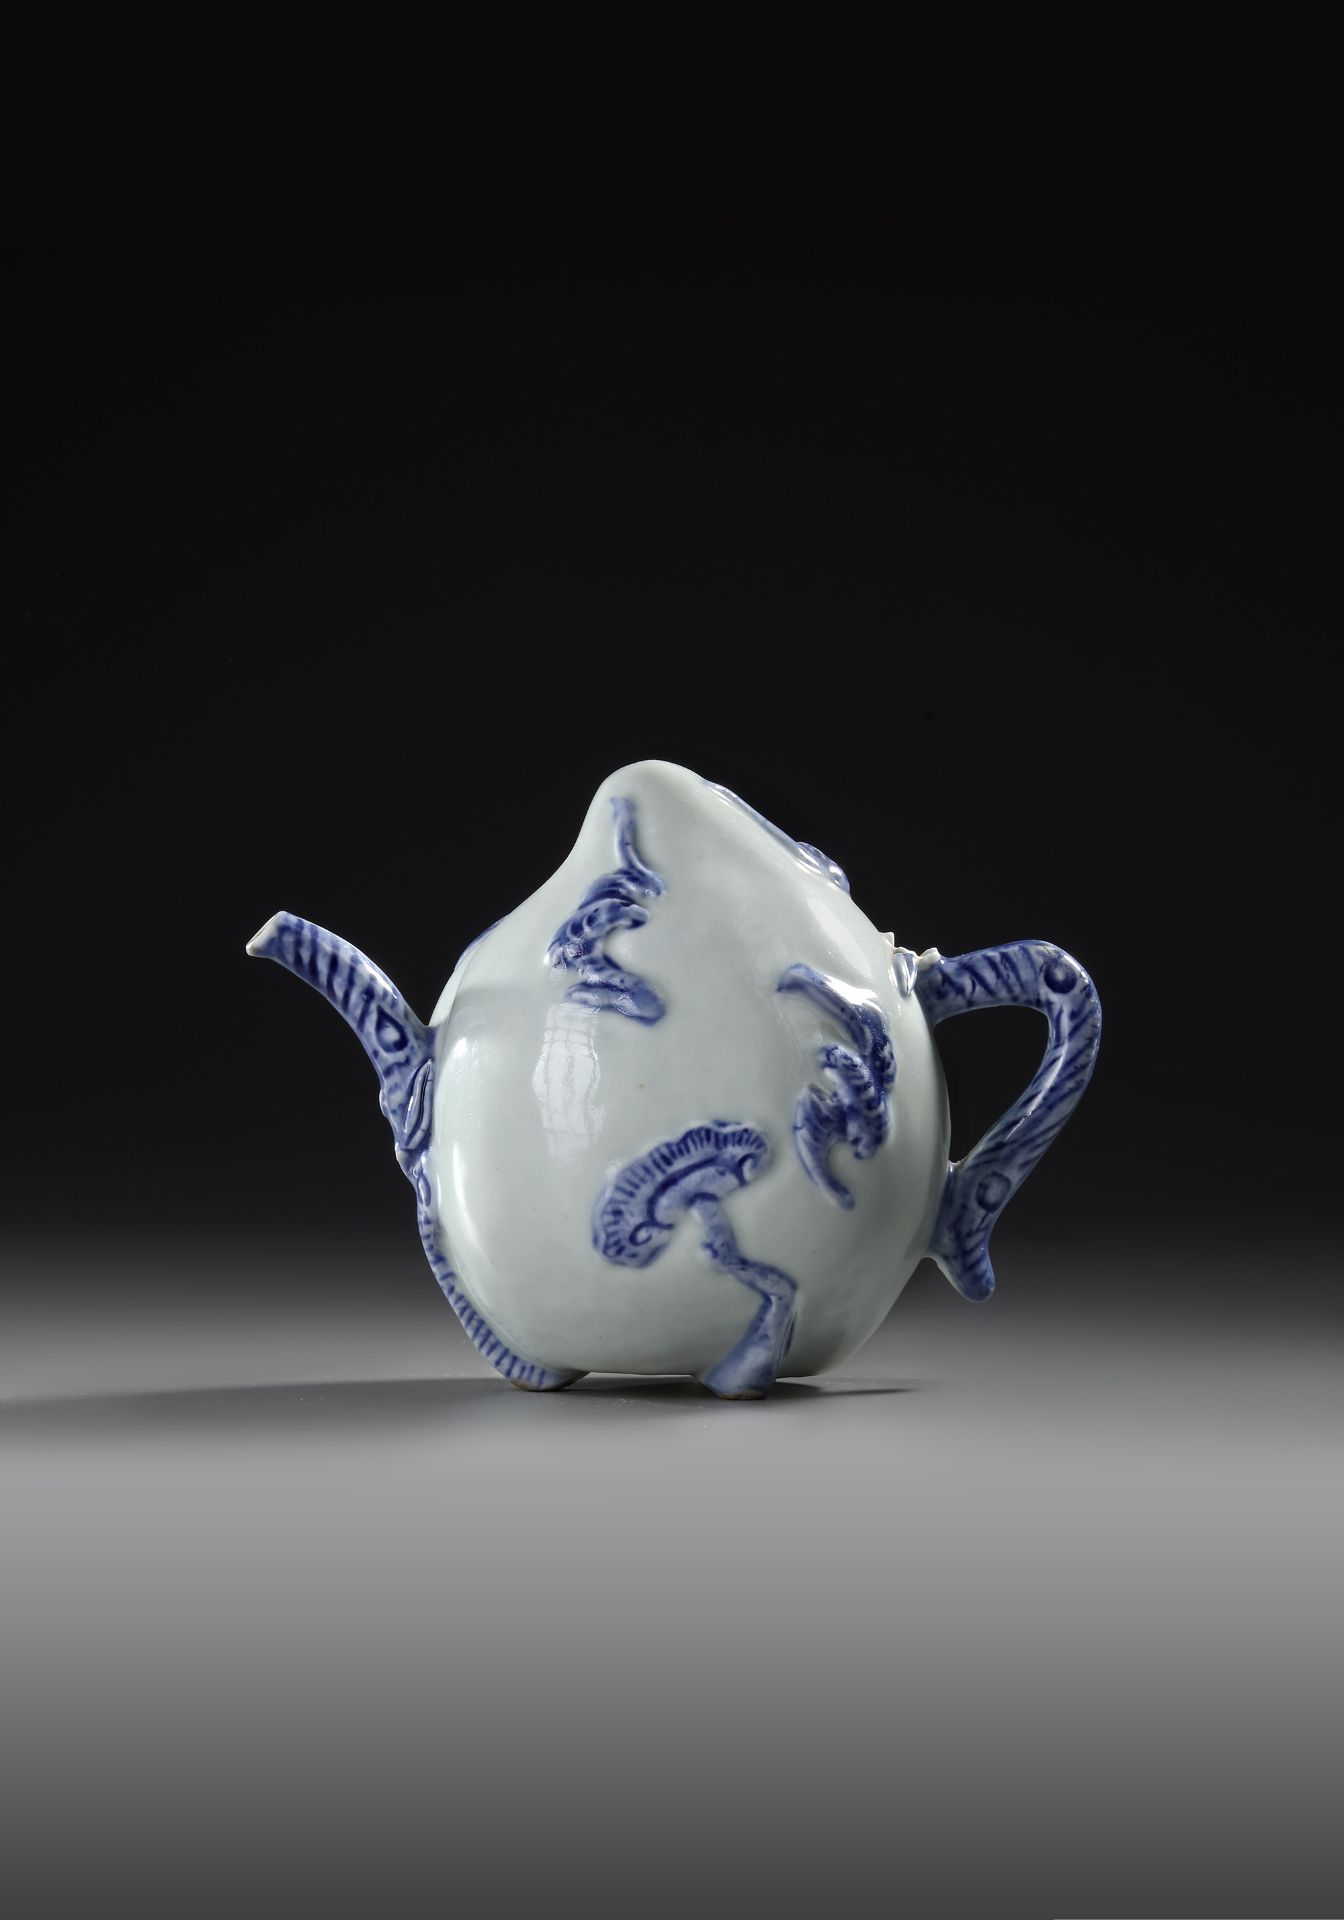 A CHINESE BLUE AND WHITE-GLAZED PEACH-FORM 'CADOGAN' TEAPOT, 19TH CENTURY